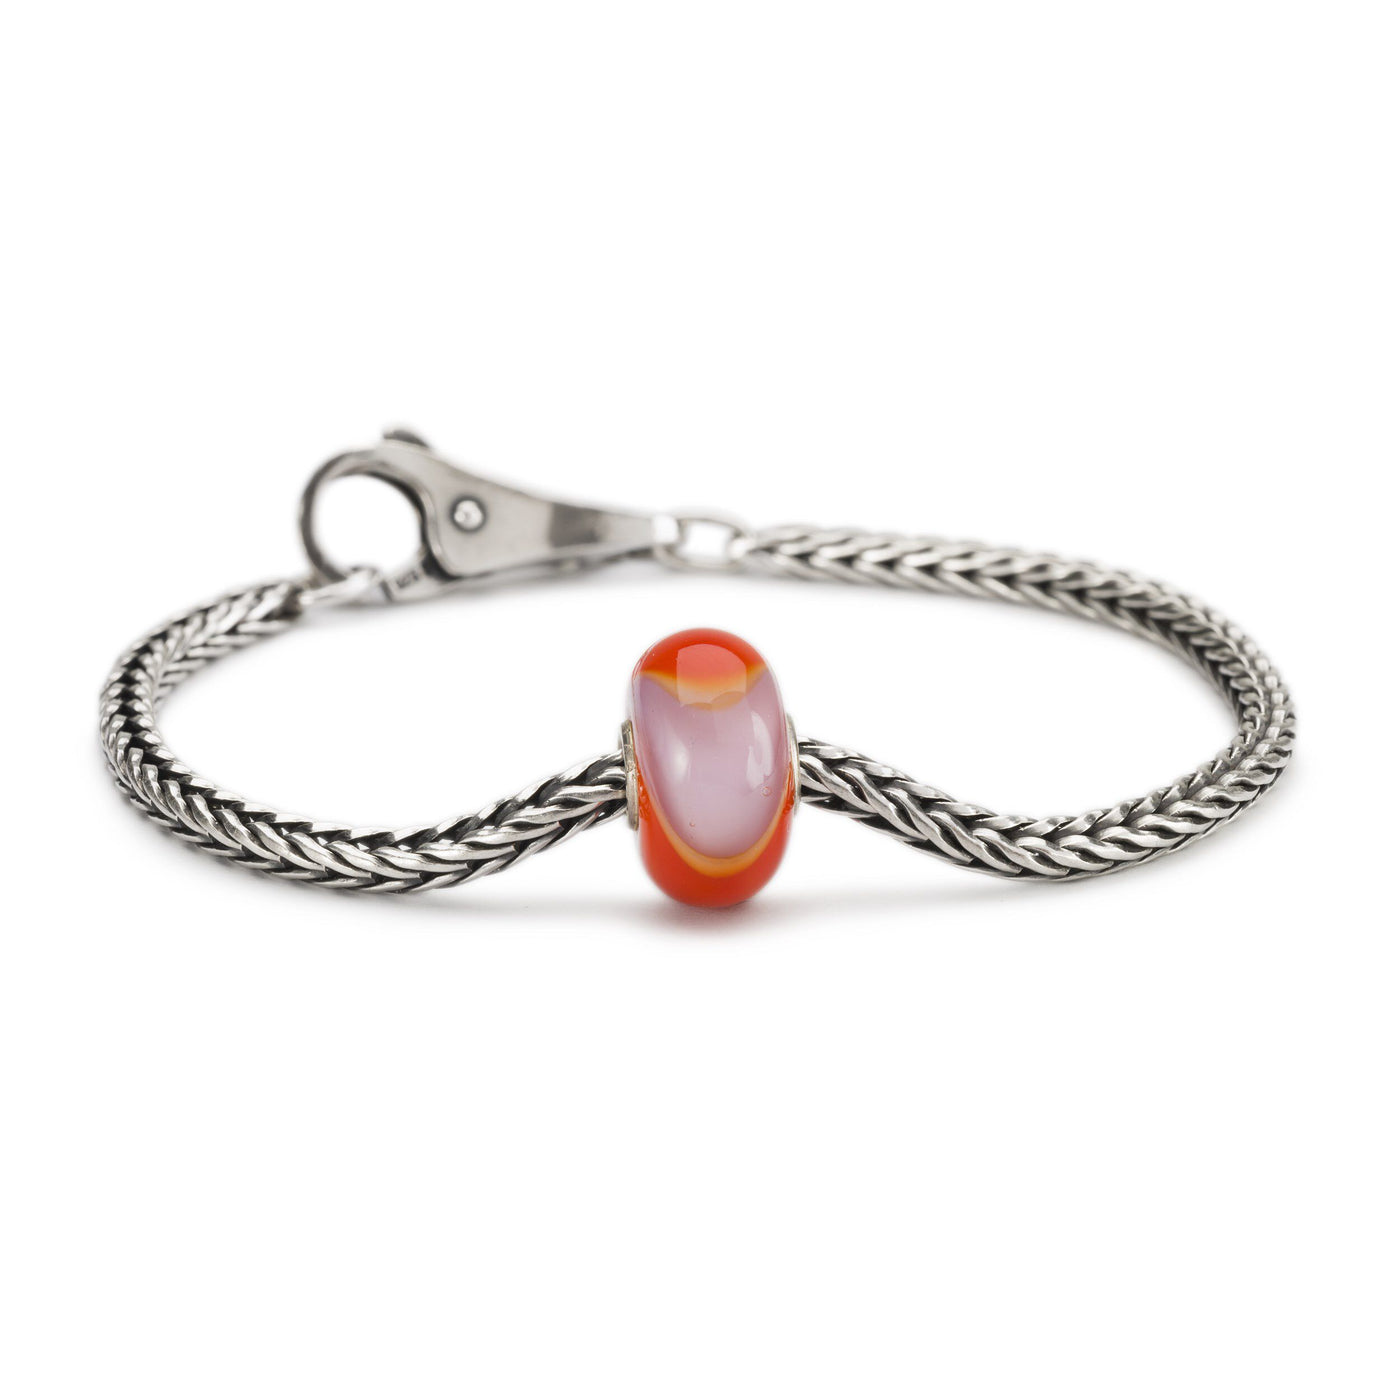 Red and Lavender Armadillo Bracelet - Trollbeads Canada